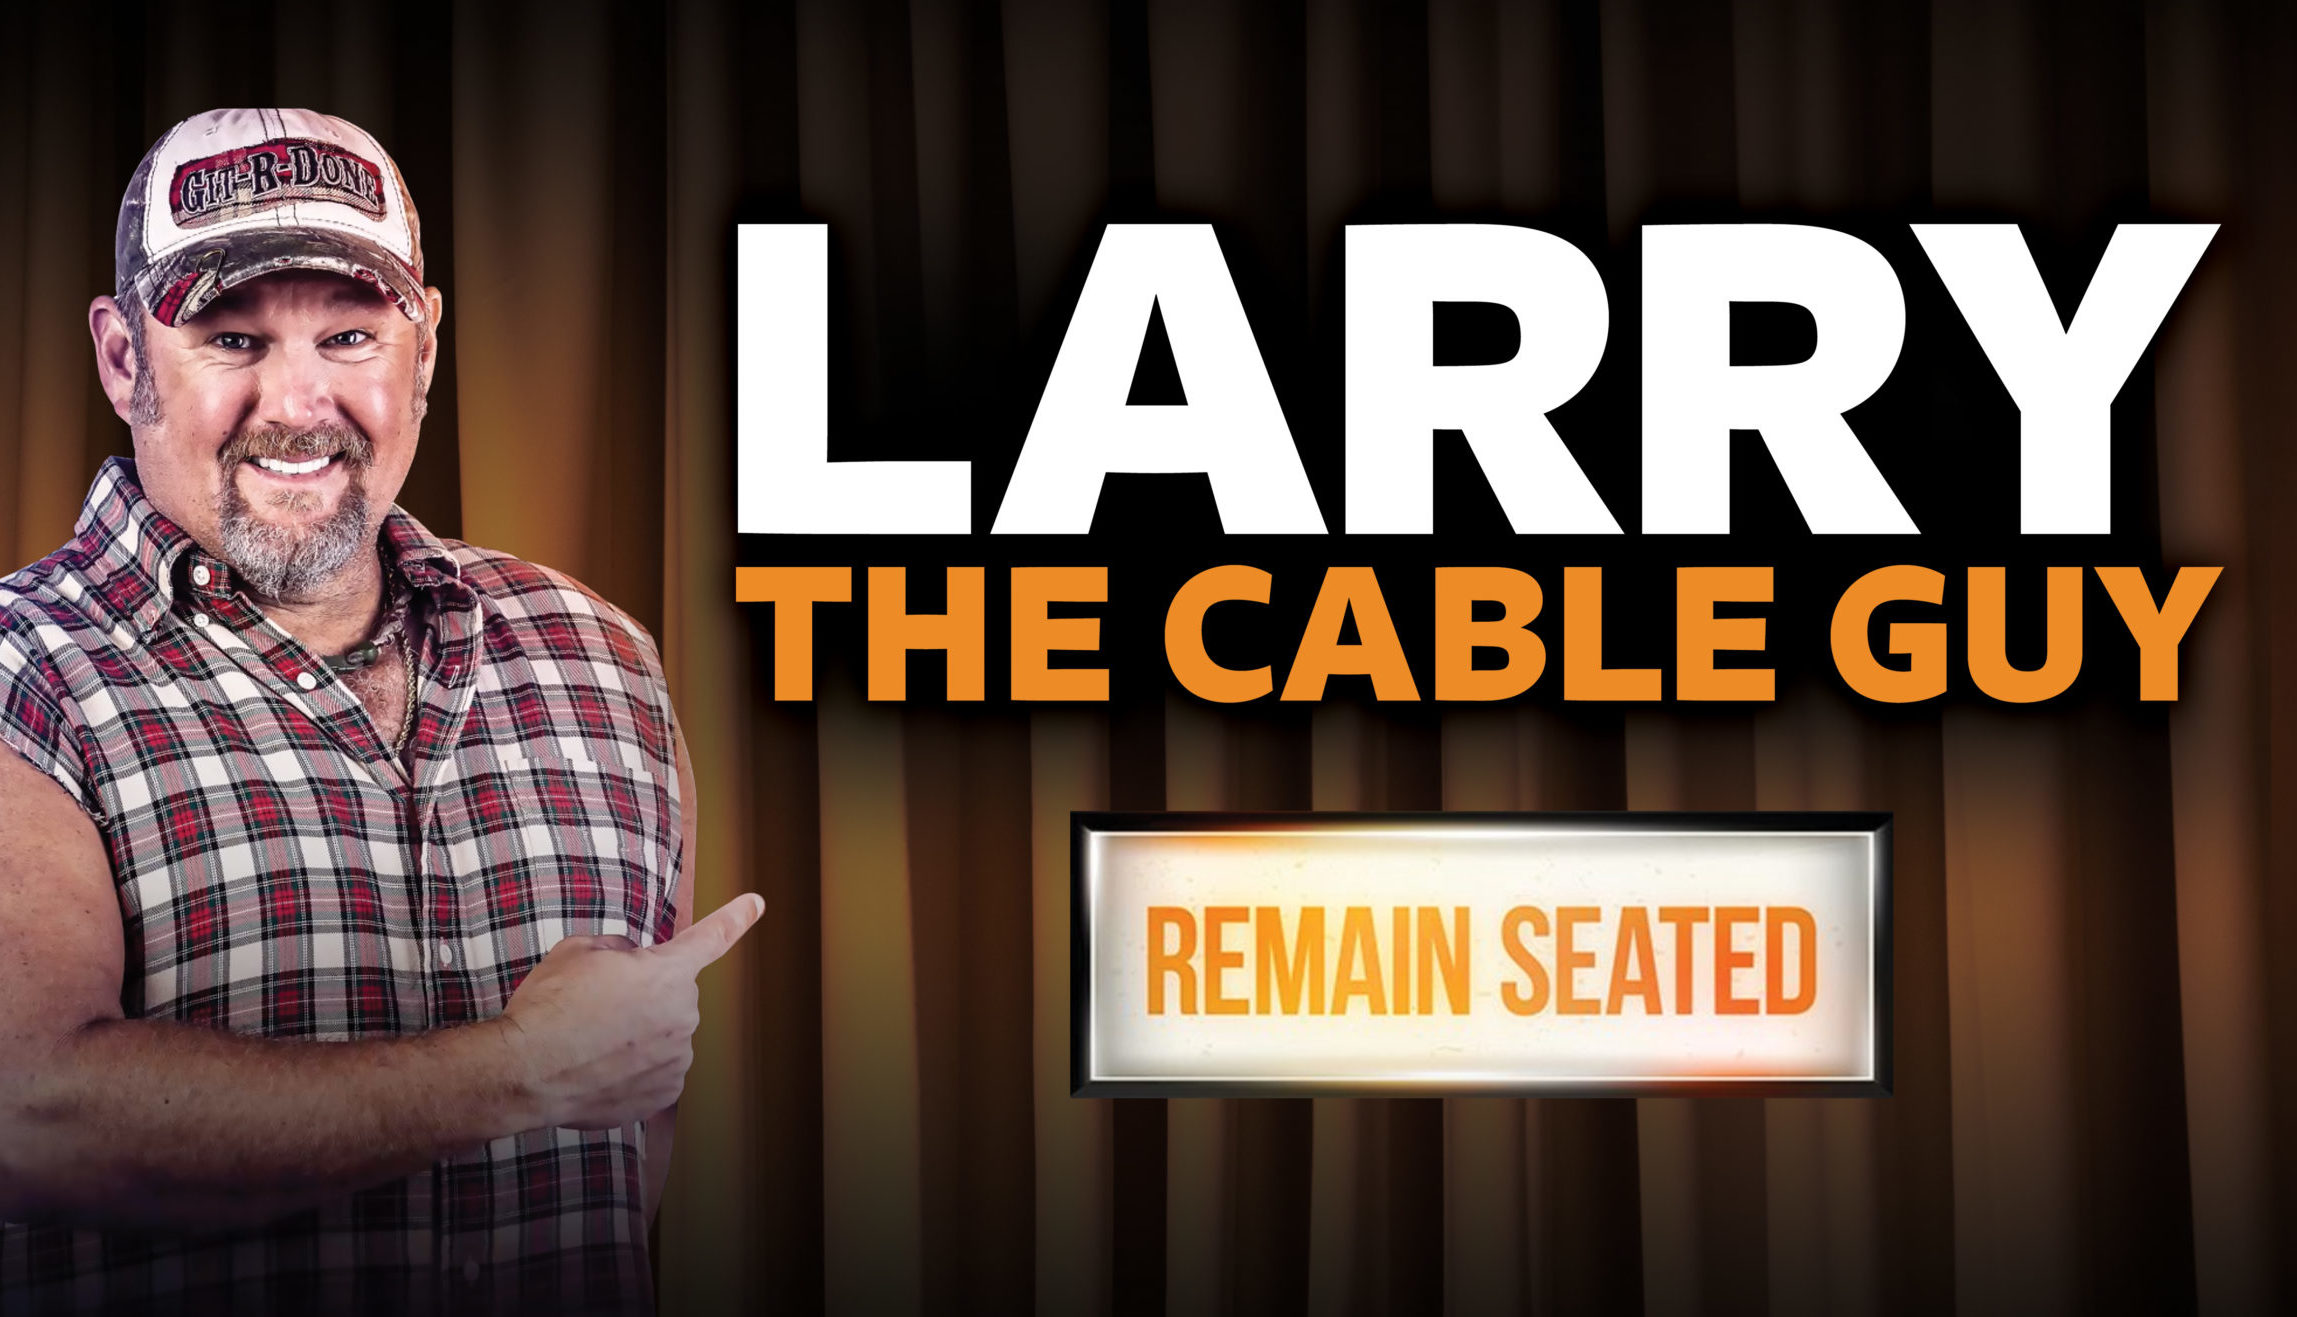 Larry The Cable Guy At Prairie Band Casino On Thursday September 2nd - The Big 945 Country